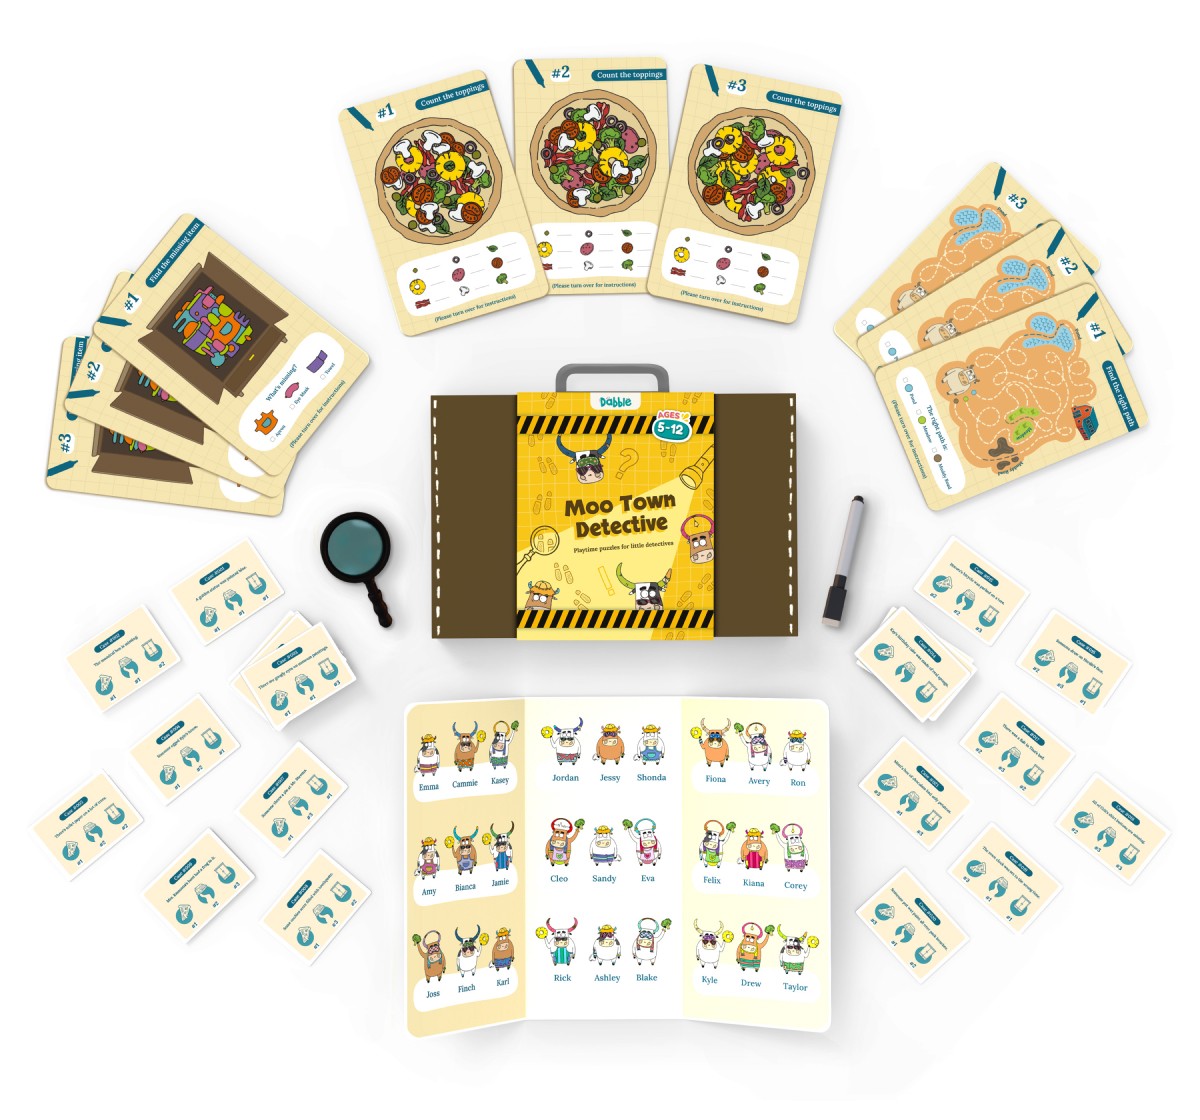 Dabble Pretend Play Detective Game by Playshifu, Moo Town Detective, Kids Detective Set, Kids for 5Y+, Multicolour